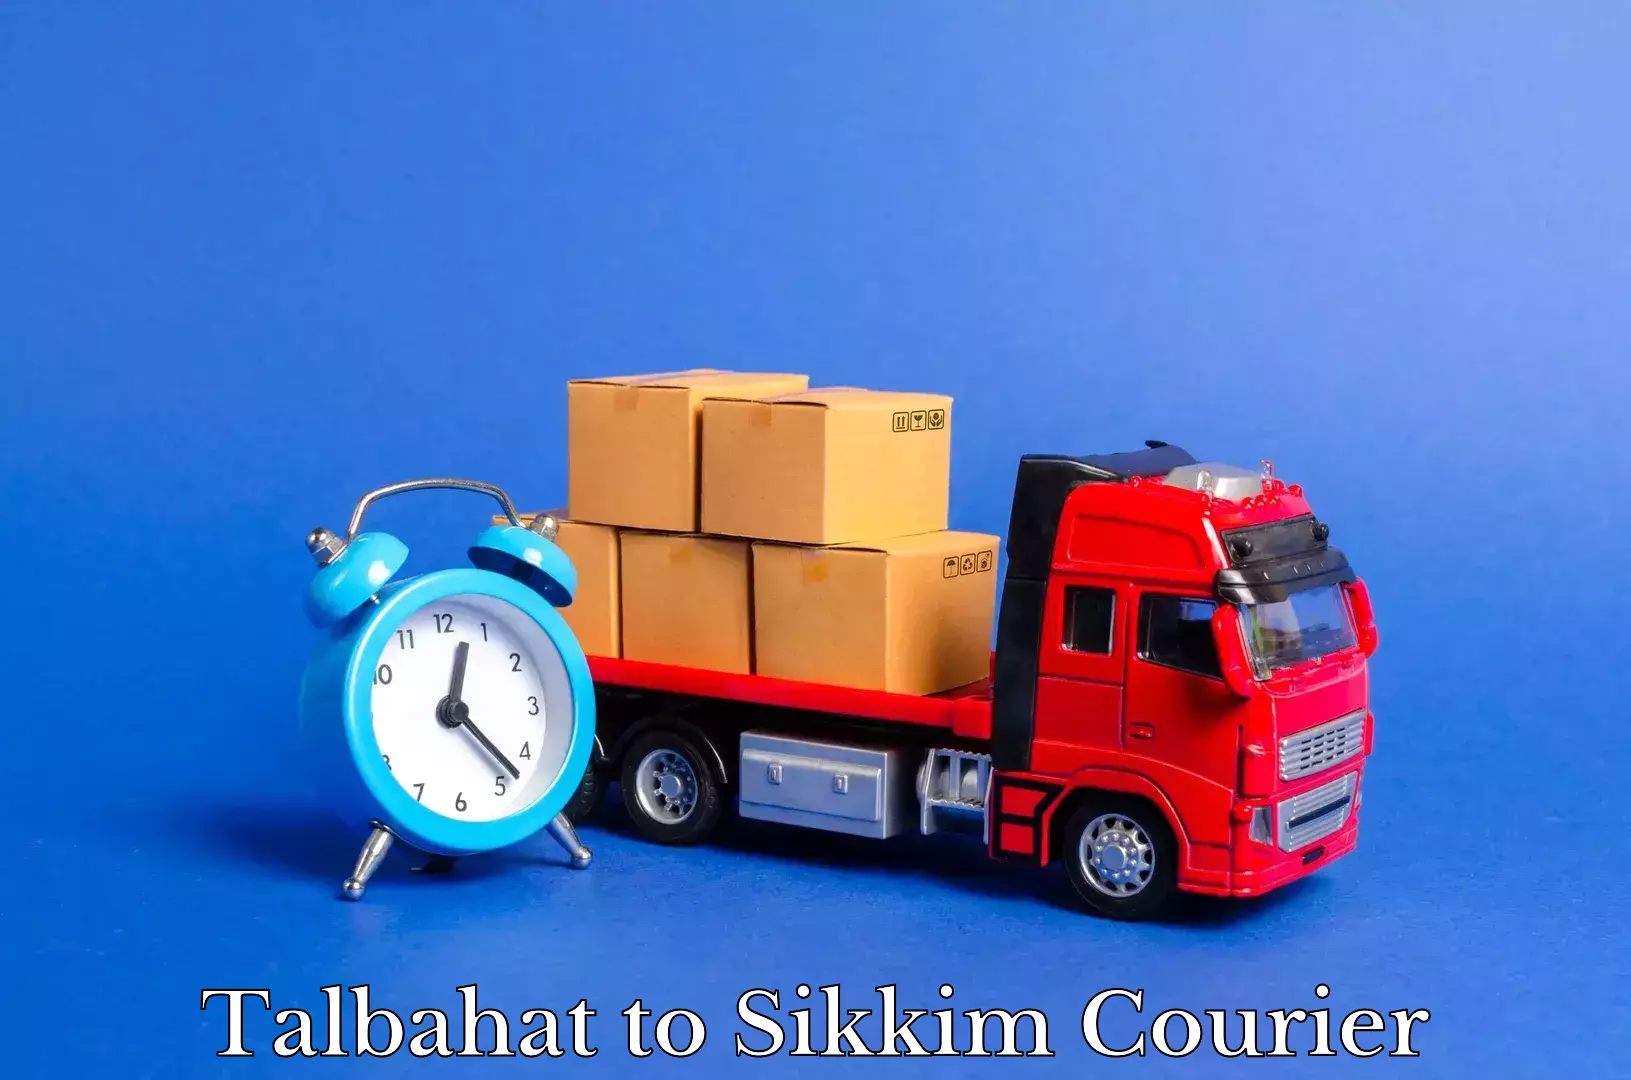 Furniture transport services Talbahat to Pelling